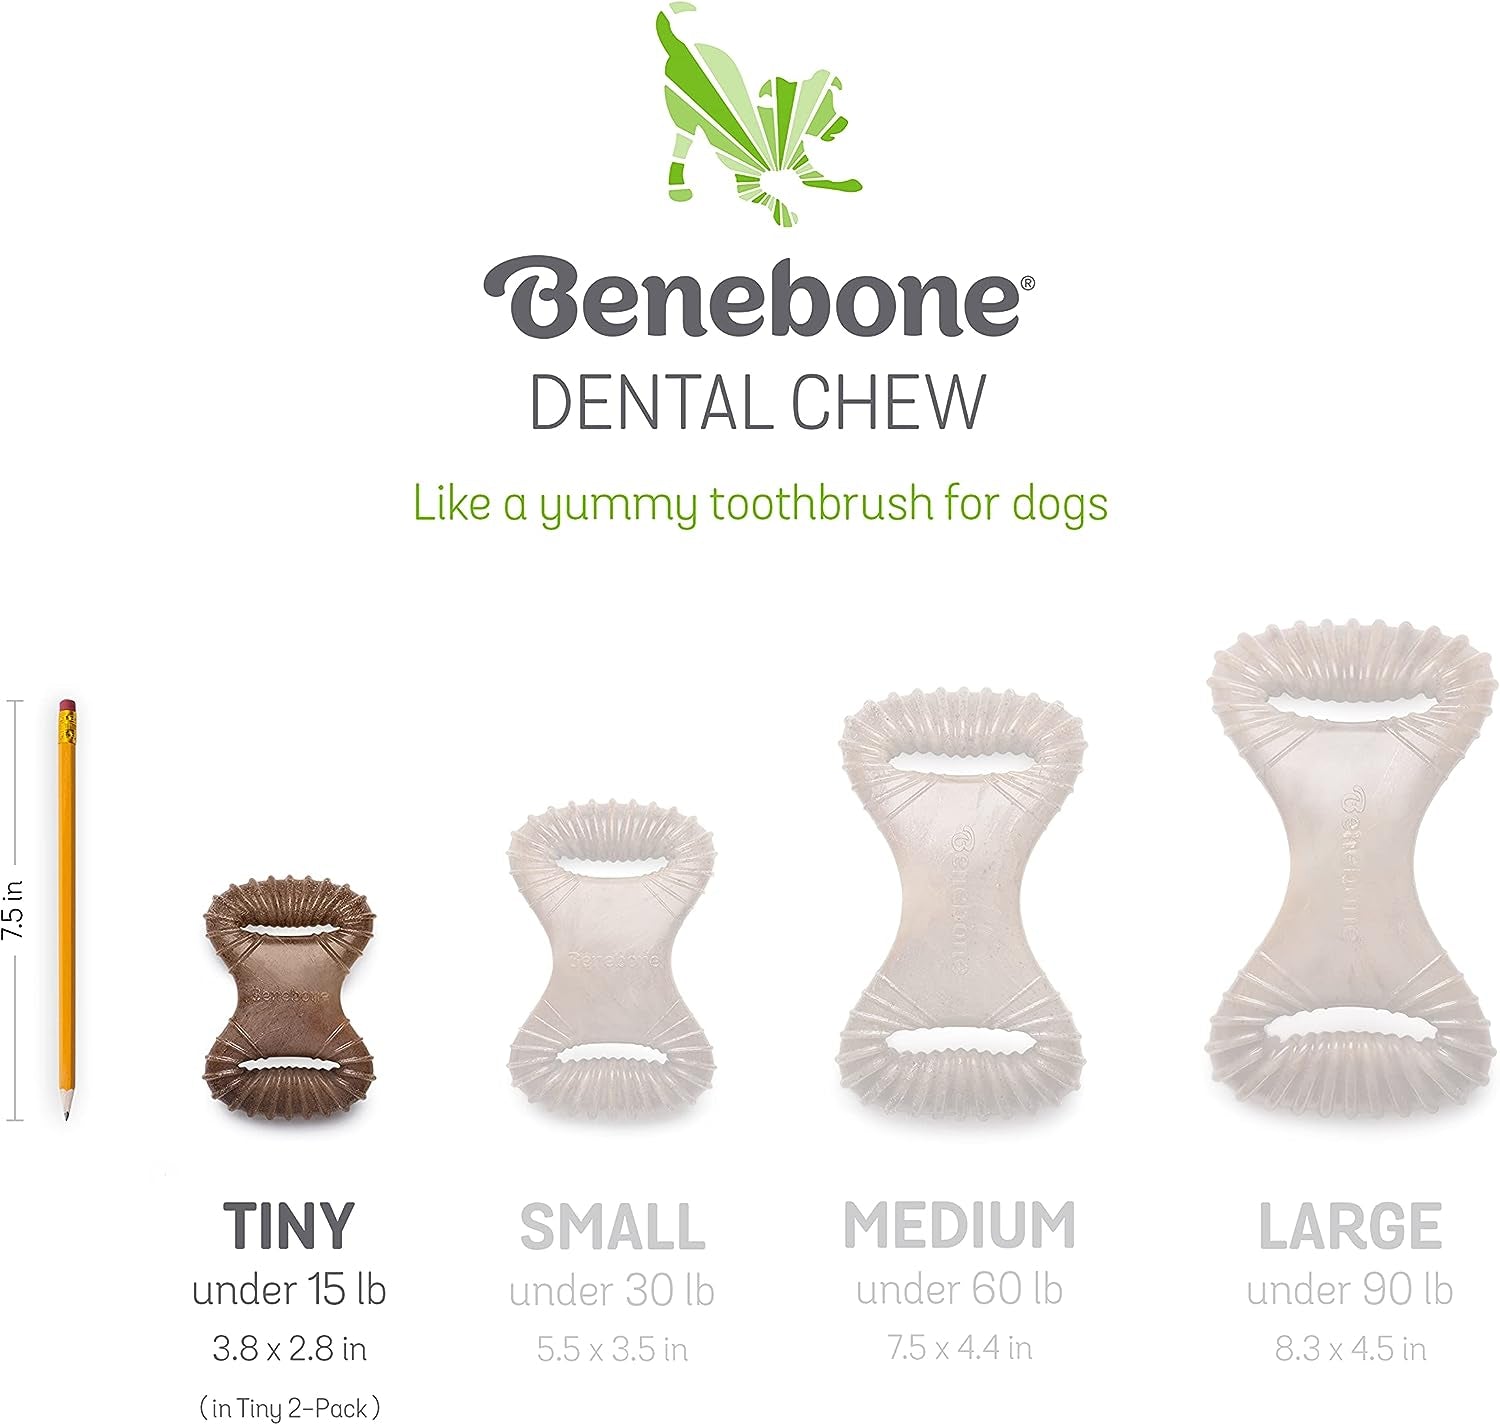 Benebone Puppy 2-Pack Dental Chew/Wishbone Dog Toys - Made in USA, Real Bacon Flavor